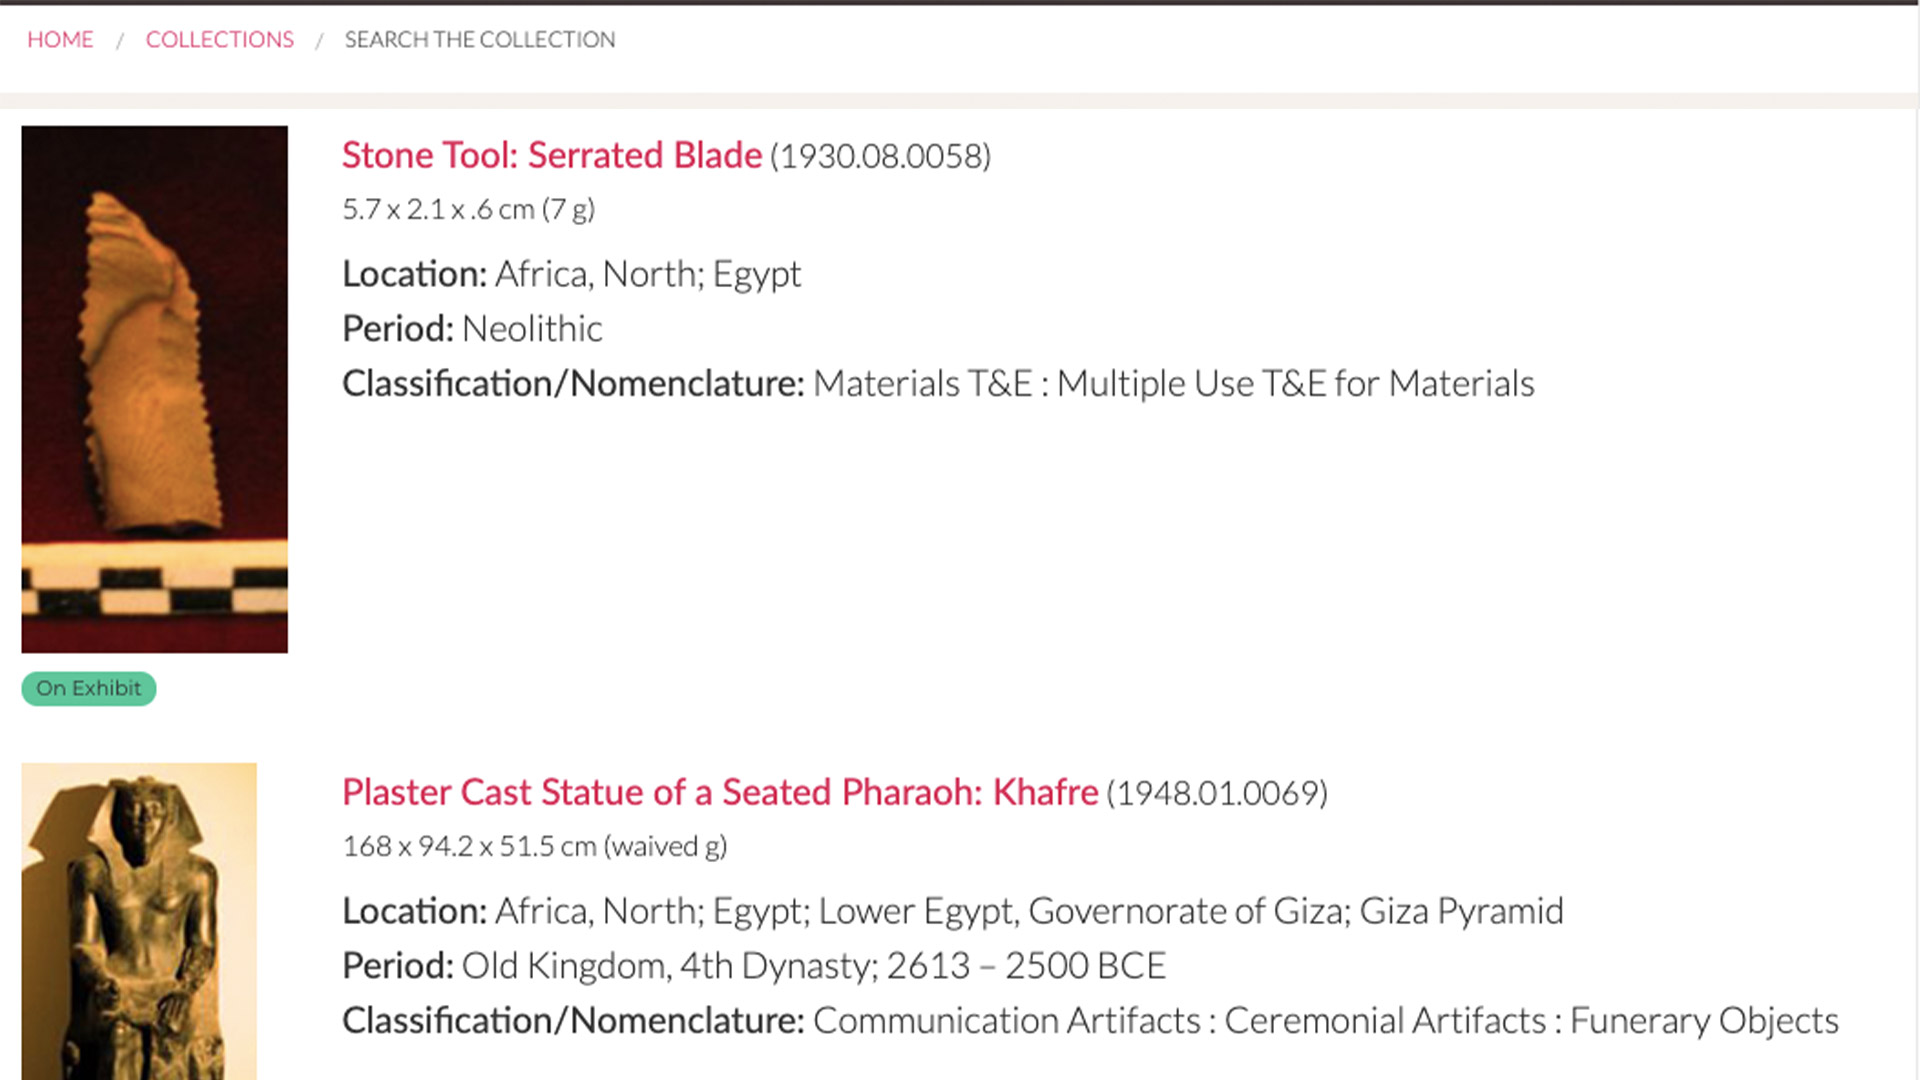 screen shot of collections search results with Egyptian stone tool and plaster cast statue of khafre